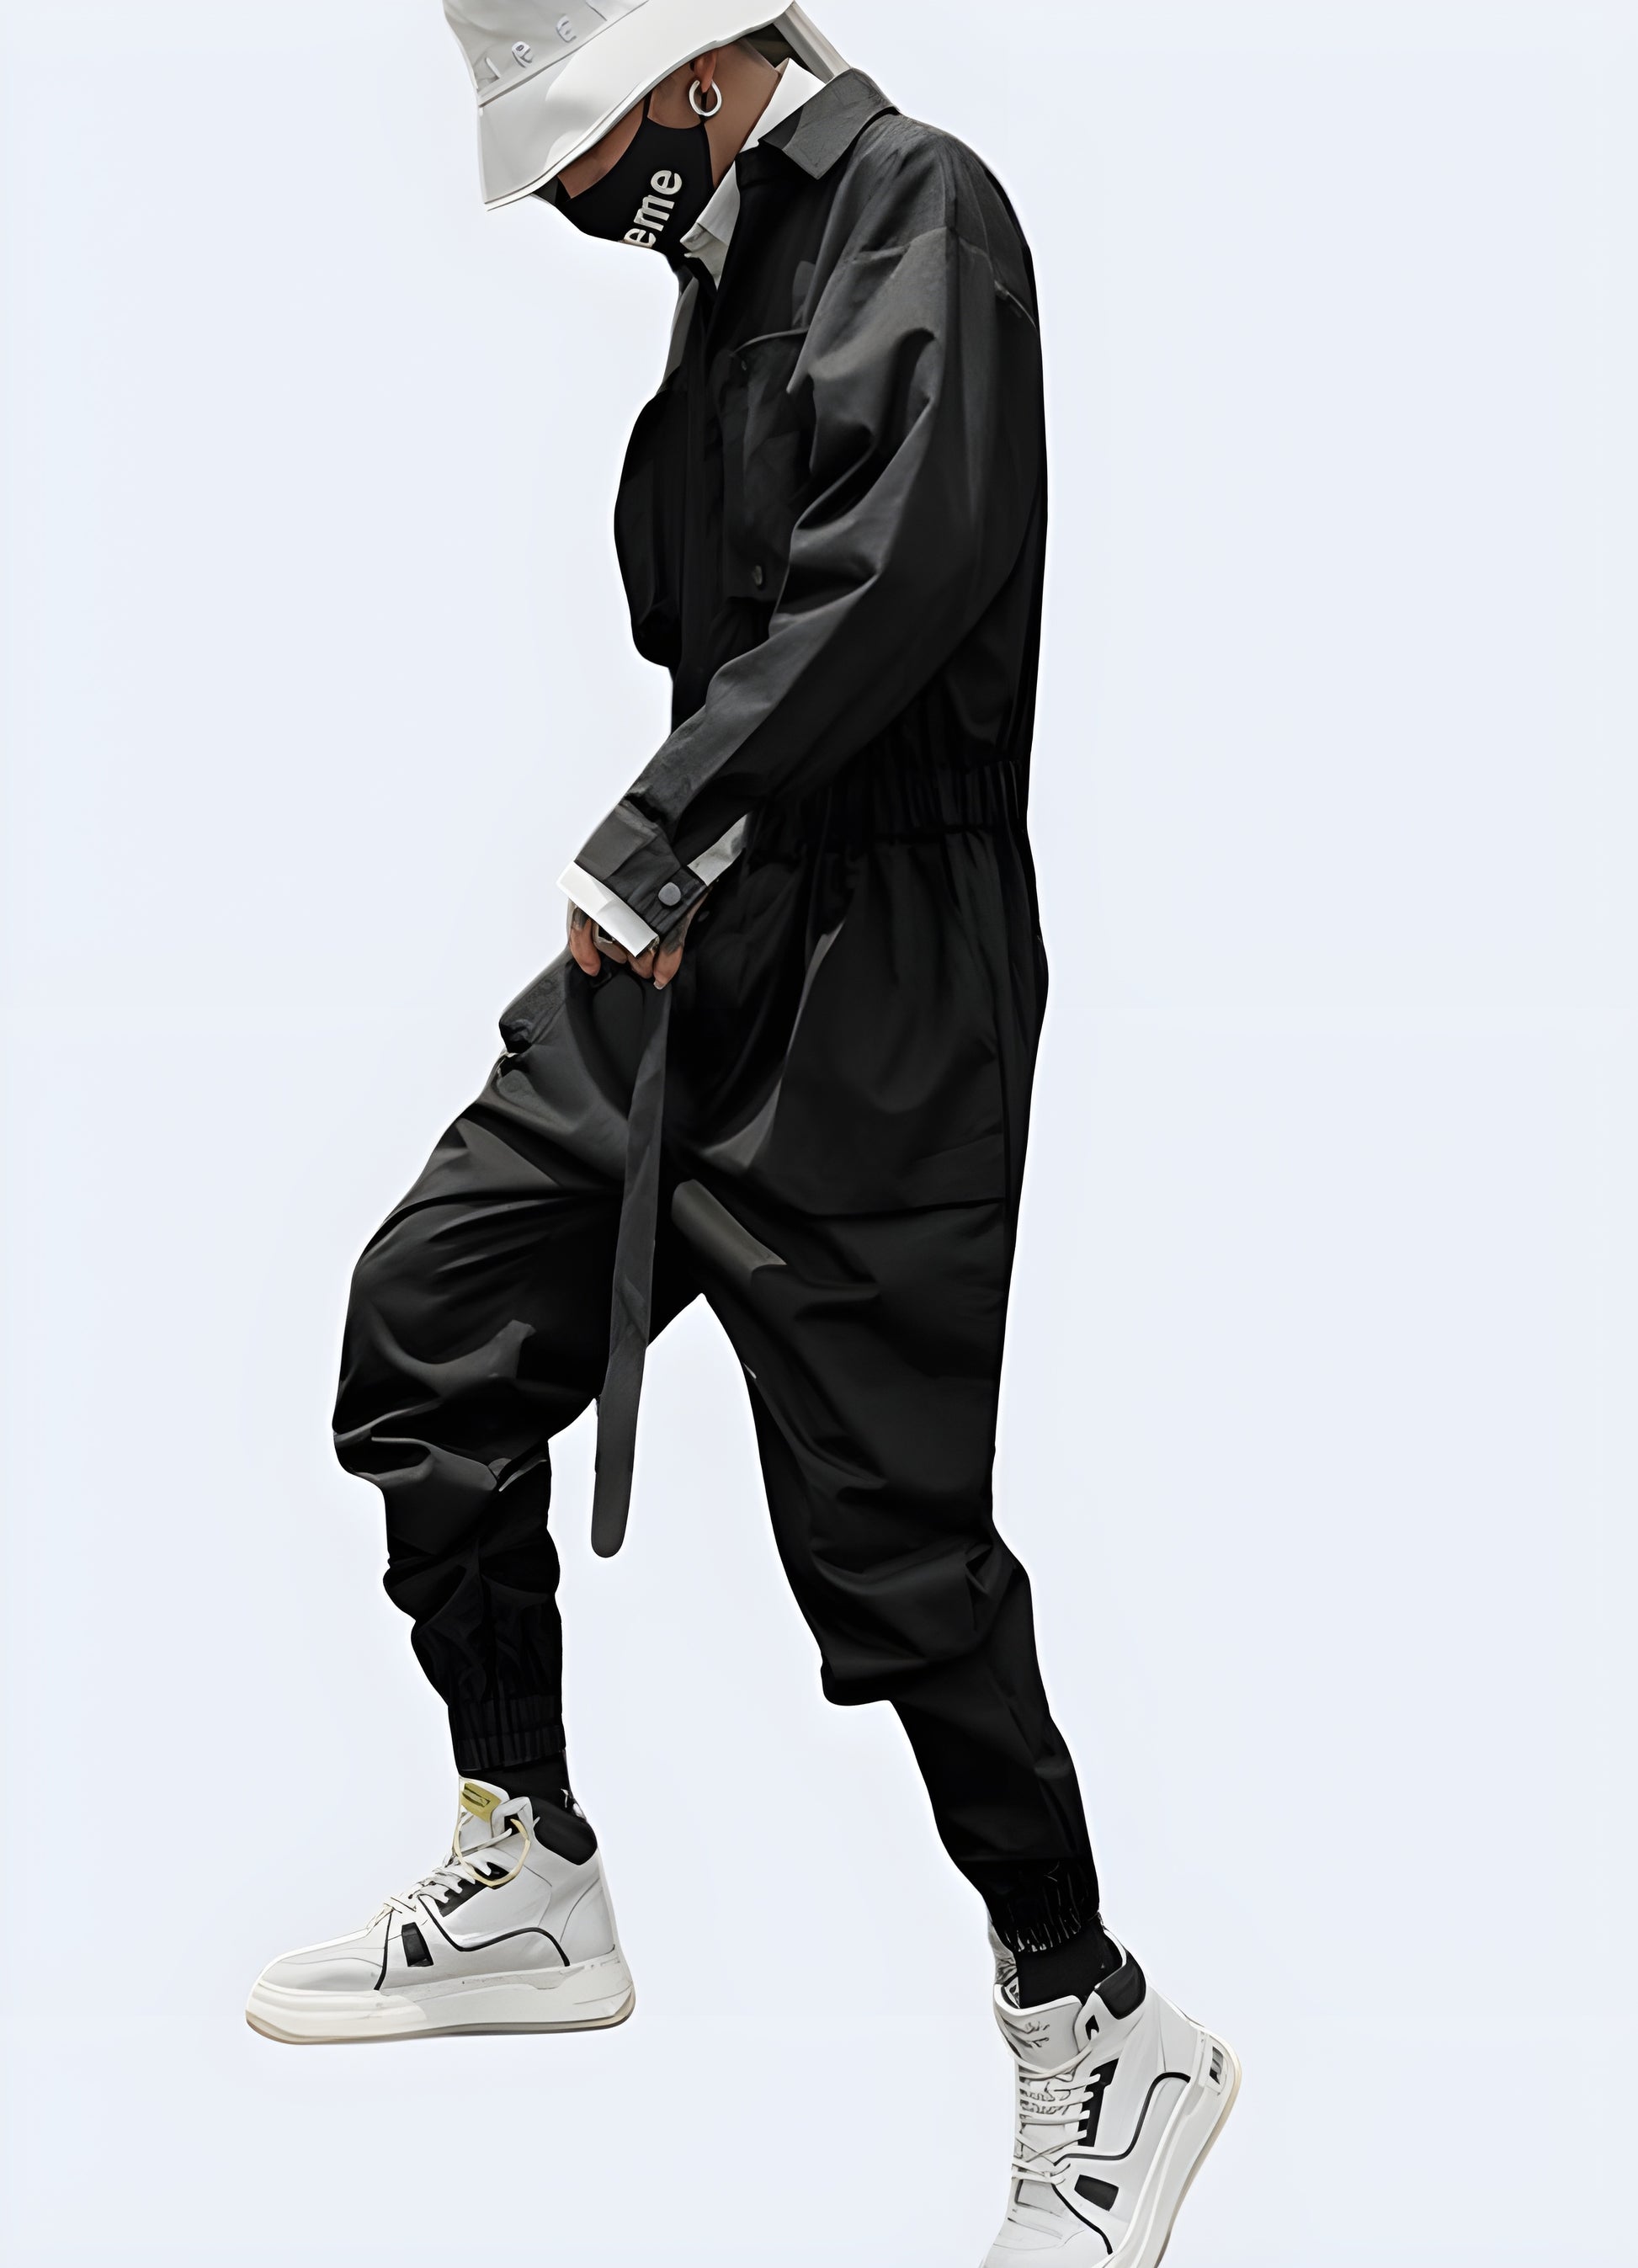 Black cargo overalls with utility pant design.